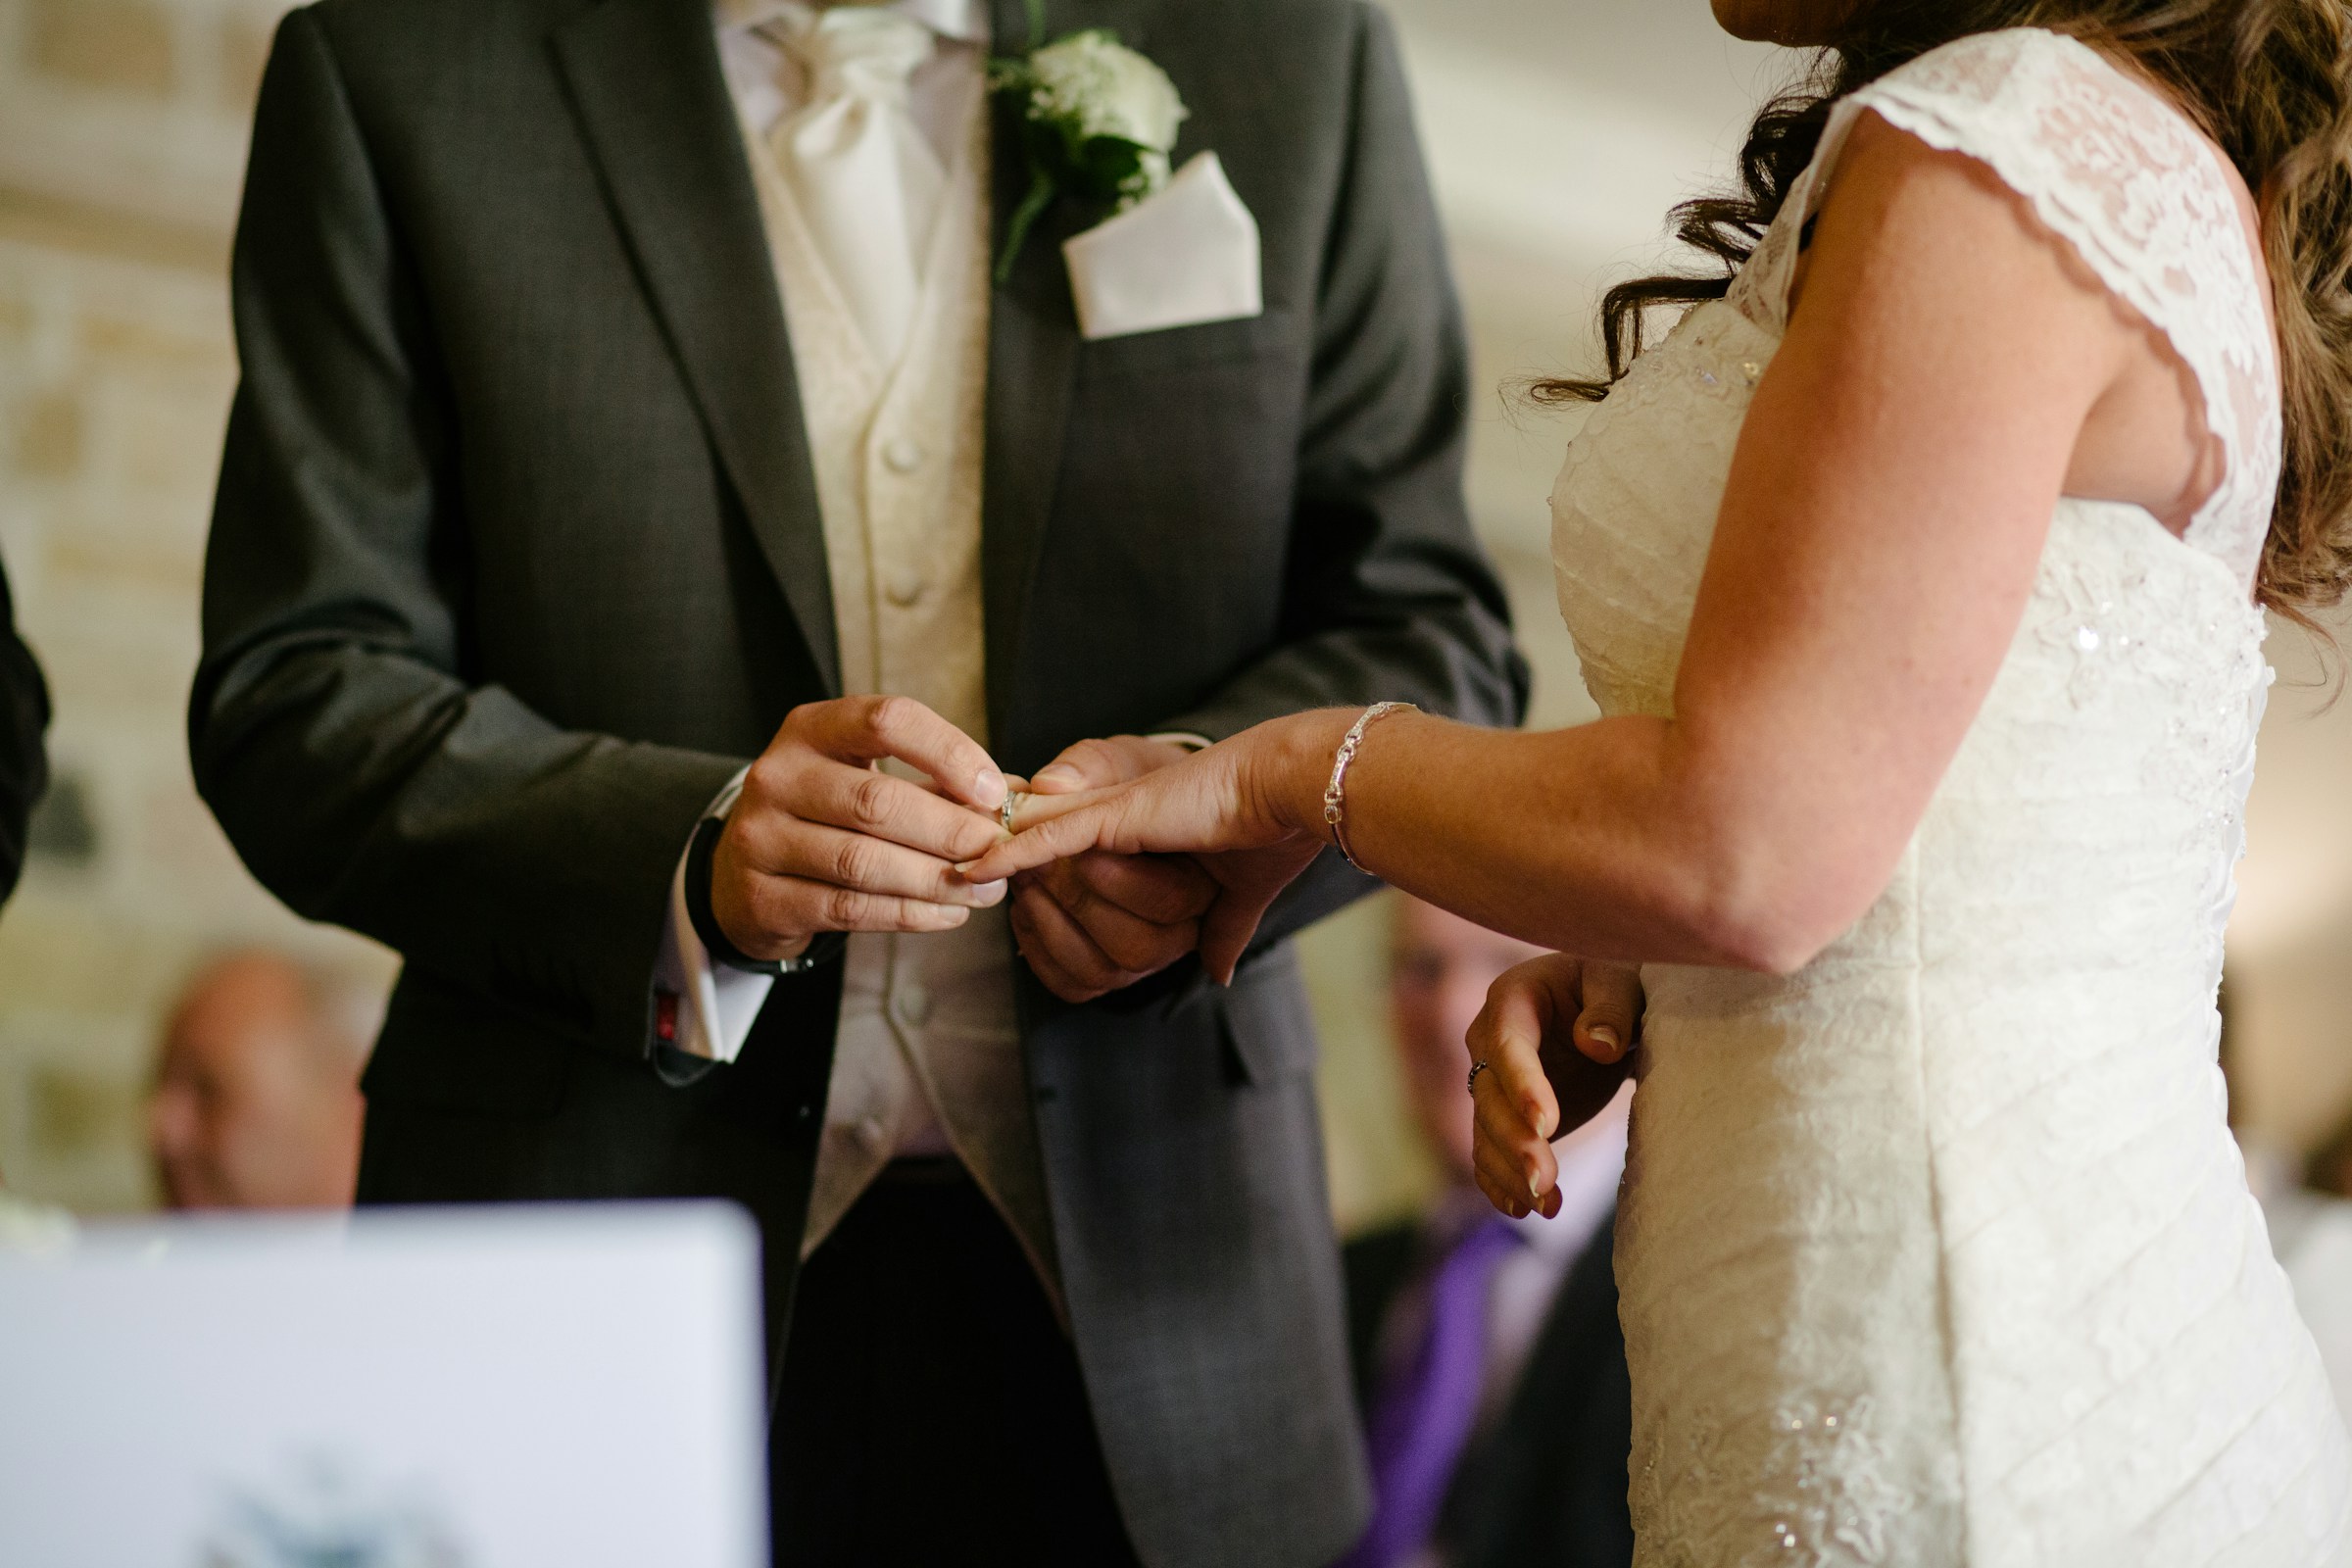 A closeup of a groom placing a wedding ring on his bride's finger | Source: Unsplash